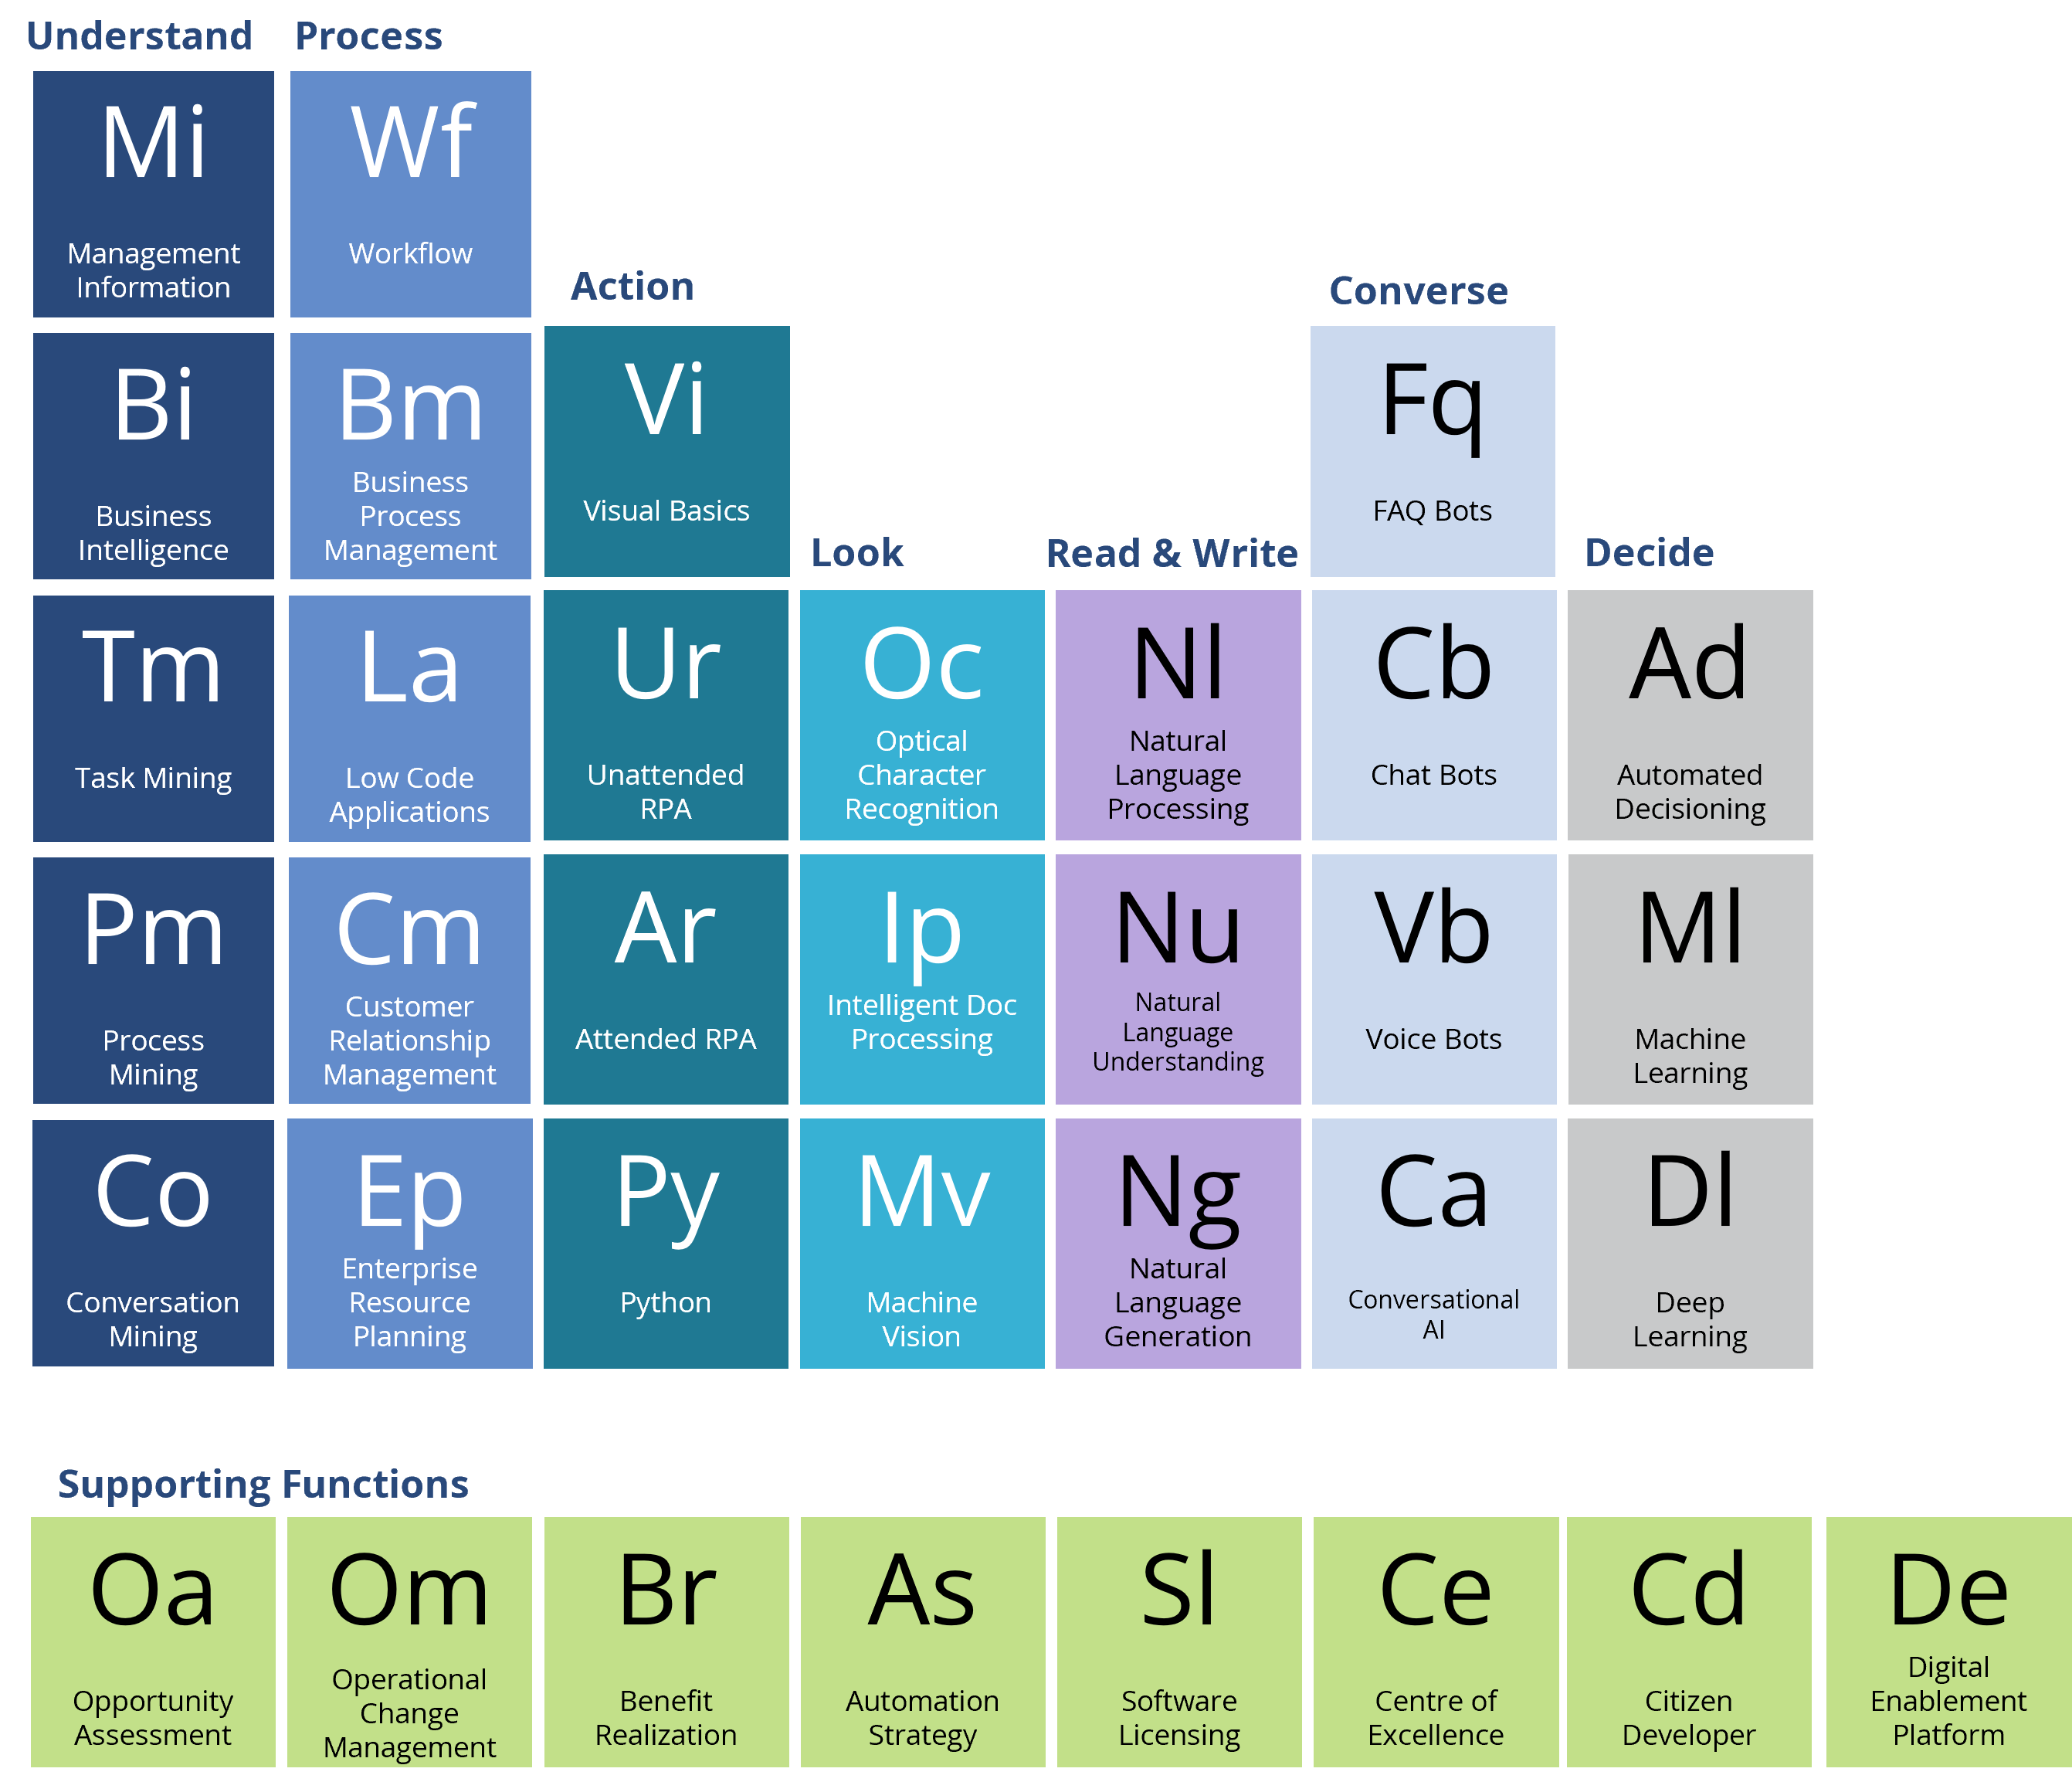 periodic table of automation technology elements v2.1